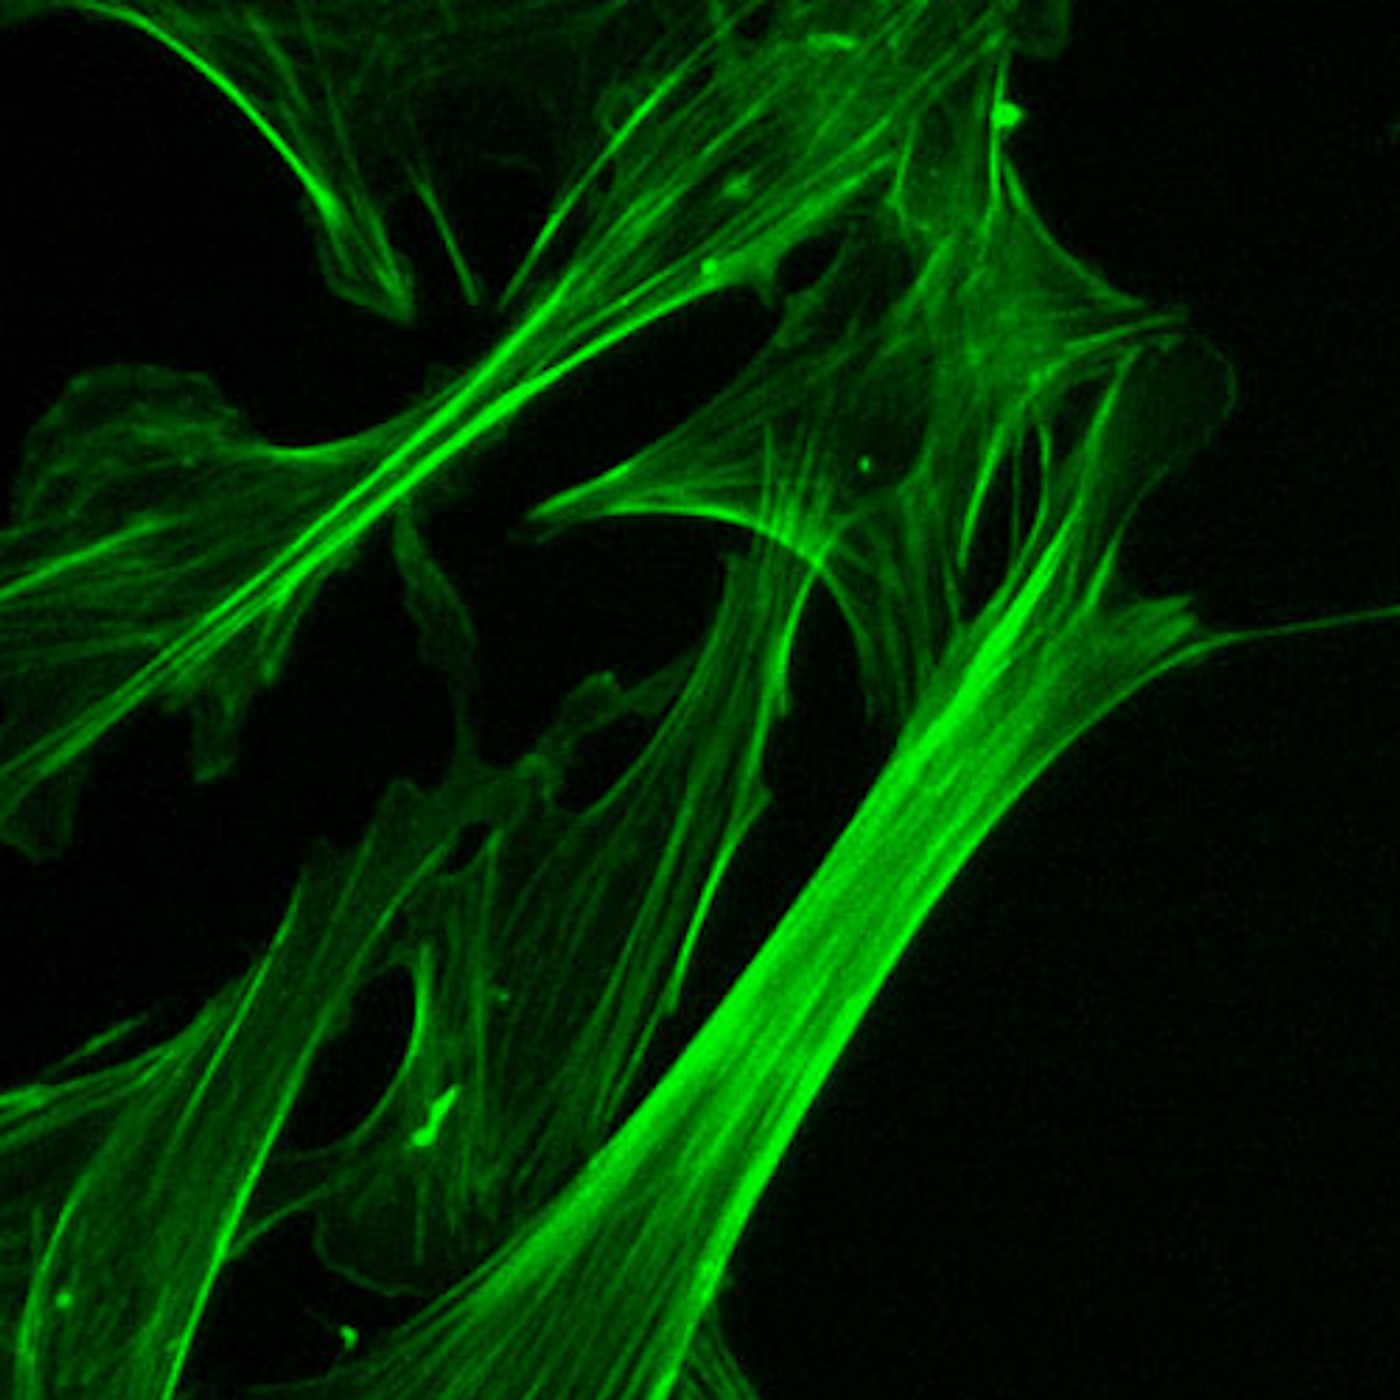 Microfilament (actin cytoskeleton) of mouse embryo fibroblasts, stained with FITC-phalloidin (100-fold magnification.)/ Credit: Wikimedia Commons/Y tambe